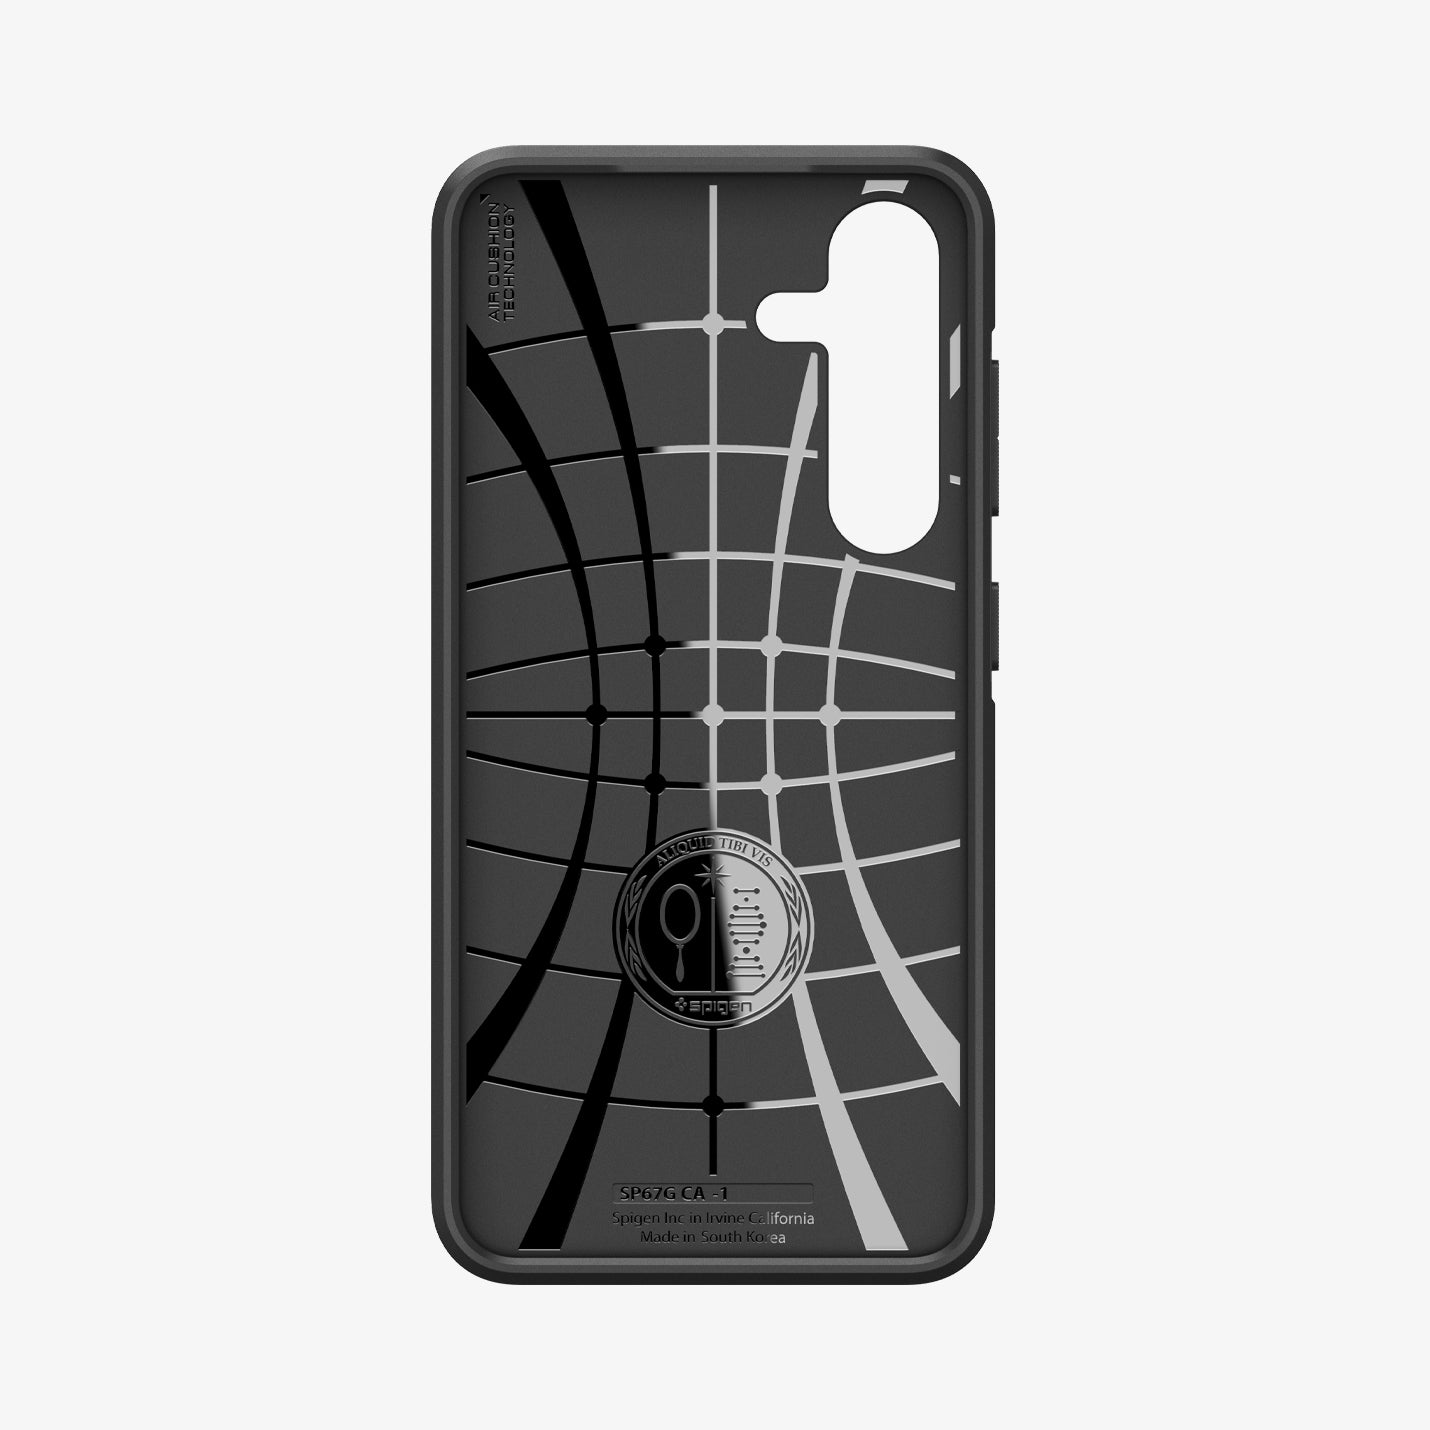 ACS07201 - Galaxy S24 Plus Case Core Armor in Matte Black showing the inner case with spider web pattern